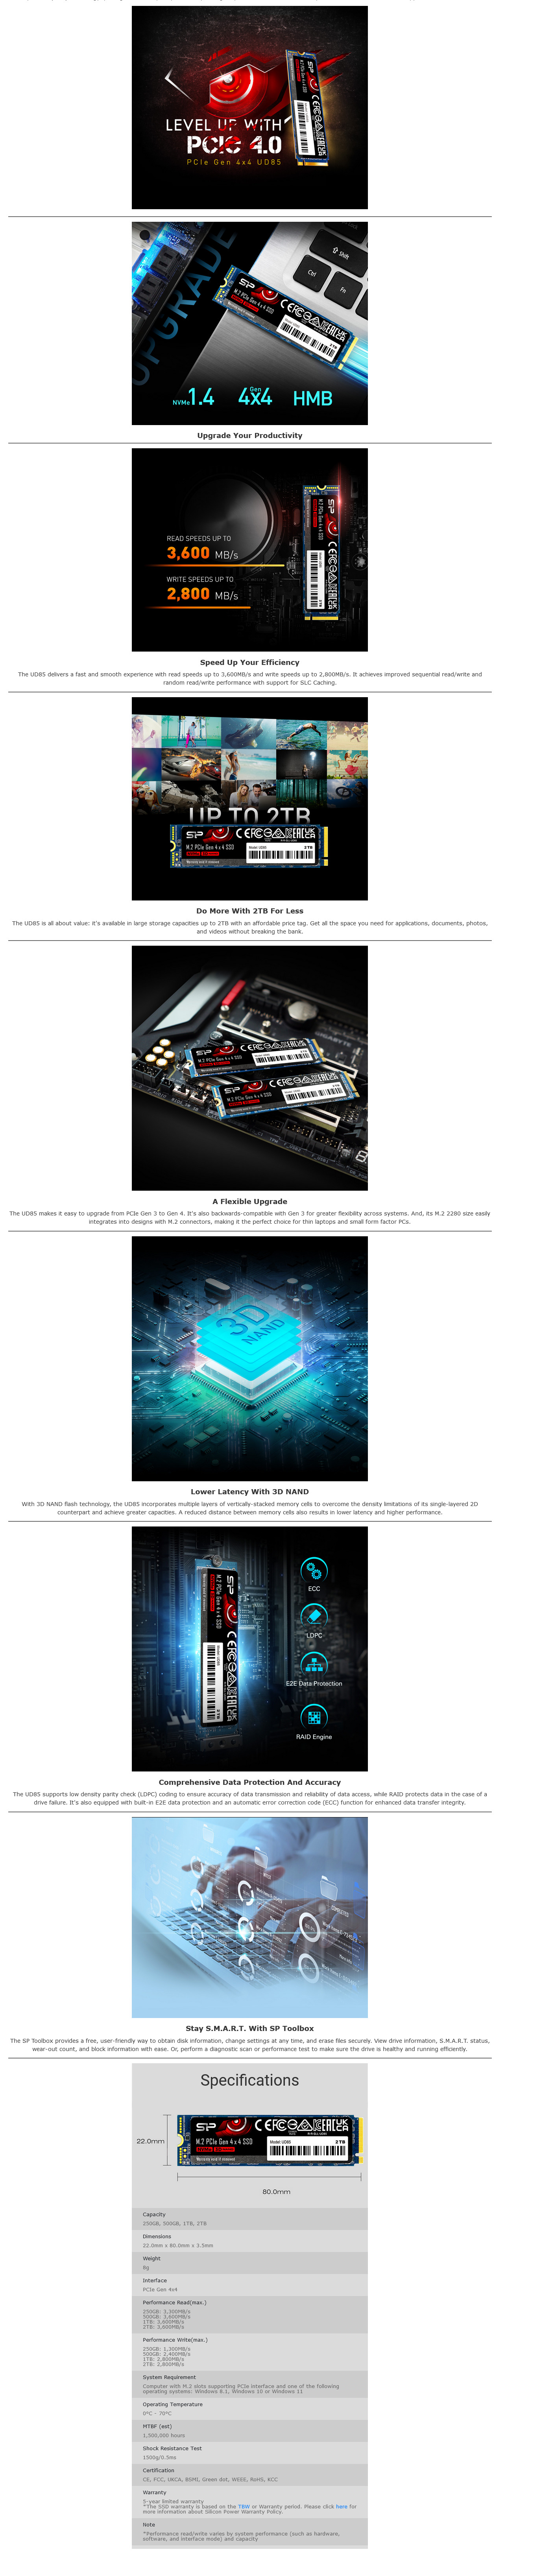 A large marketing image providing additional information about the product Silicon Power UD85 PCIe 4.0 NVMe M.2 SSD - 1TB - Additional alt info not provided